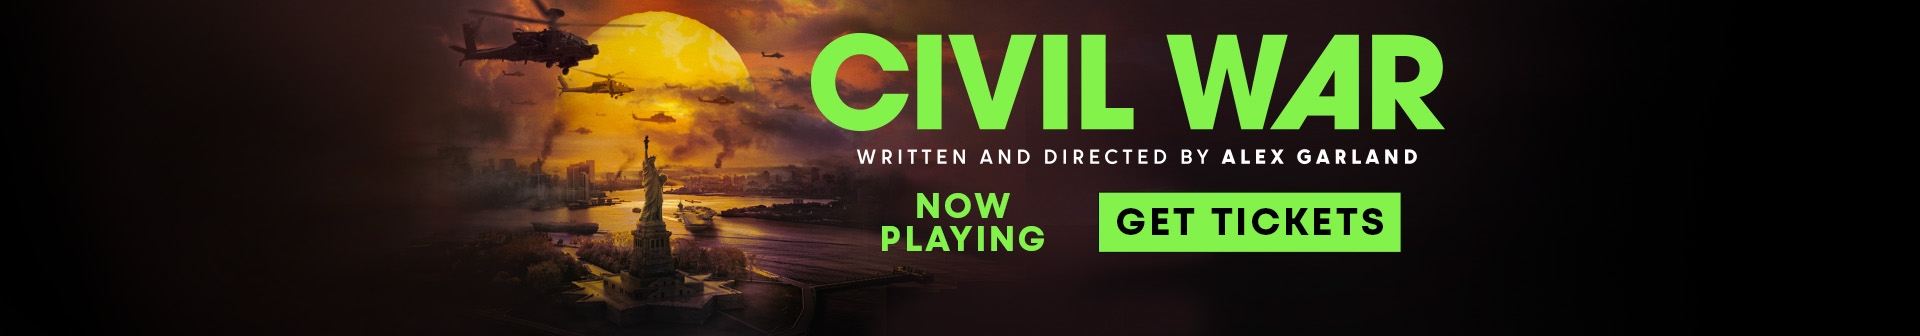 Civil war, now playing in theatres. Get tickets